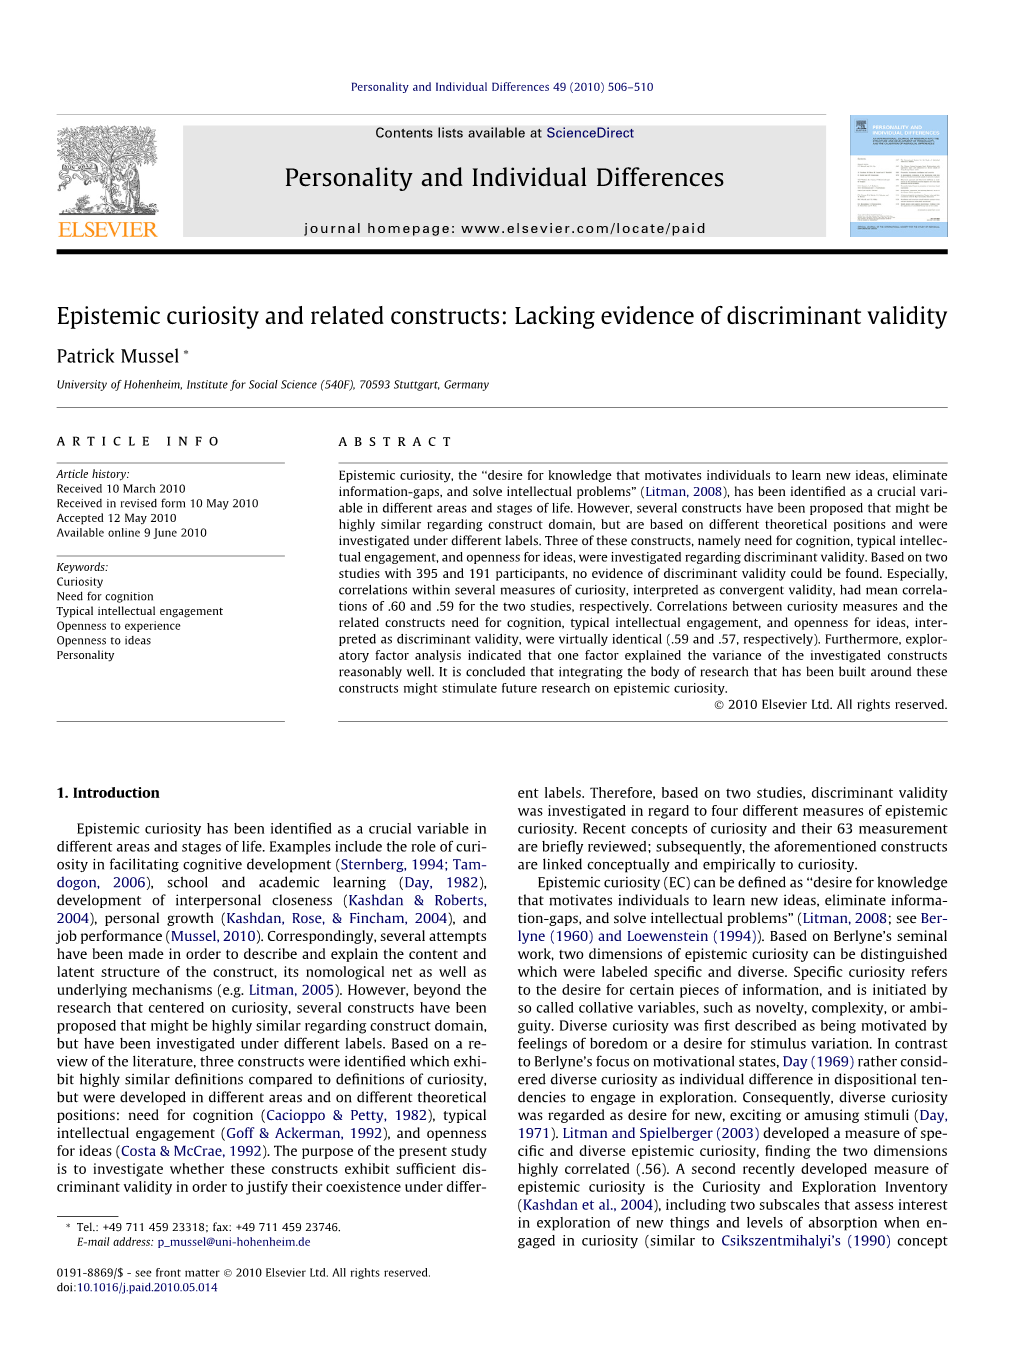 Epistemic Curiosity and Related Constructs: Lacking Evidence of Discriminant Validity